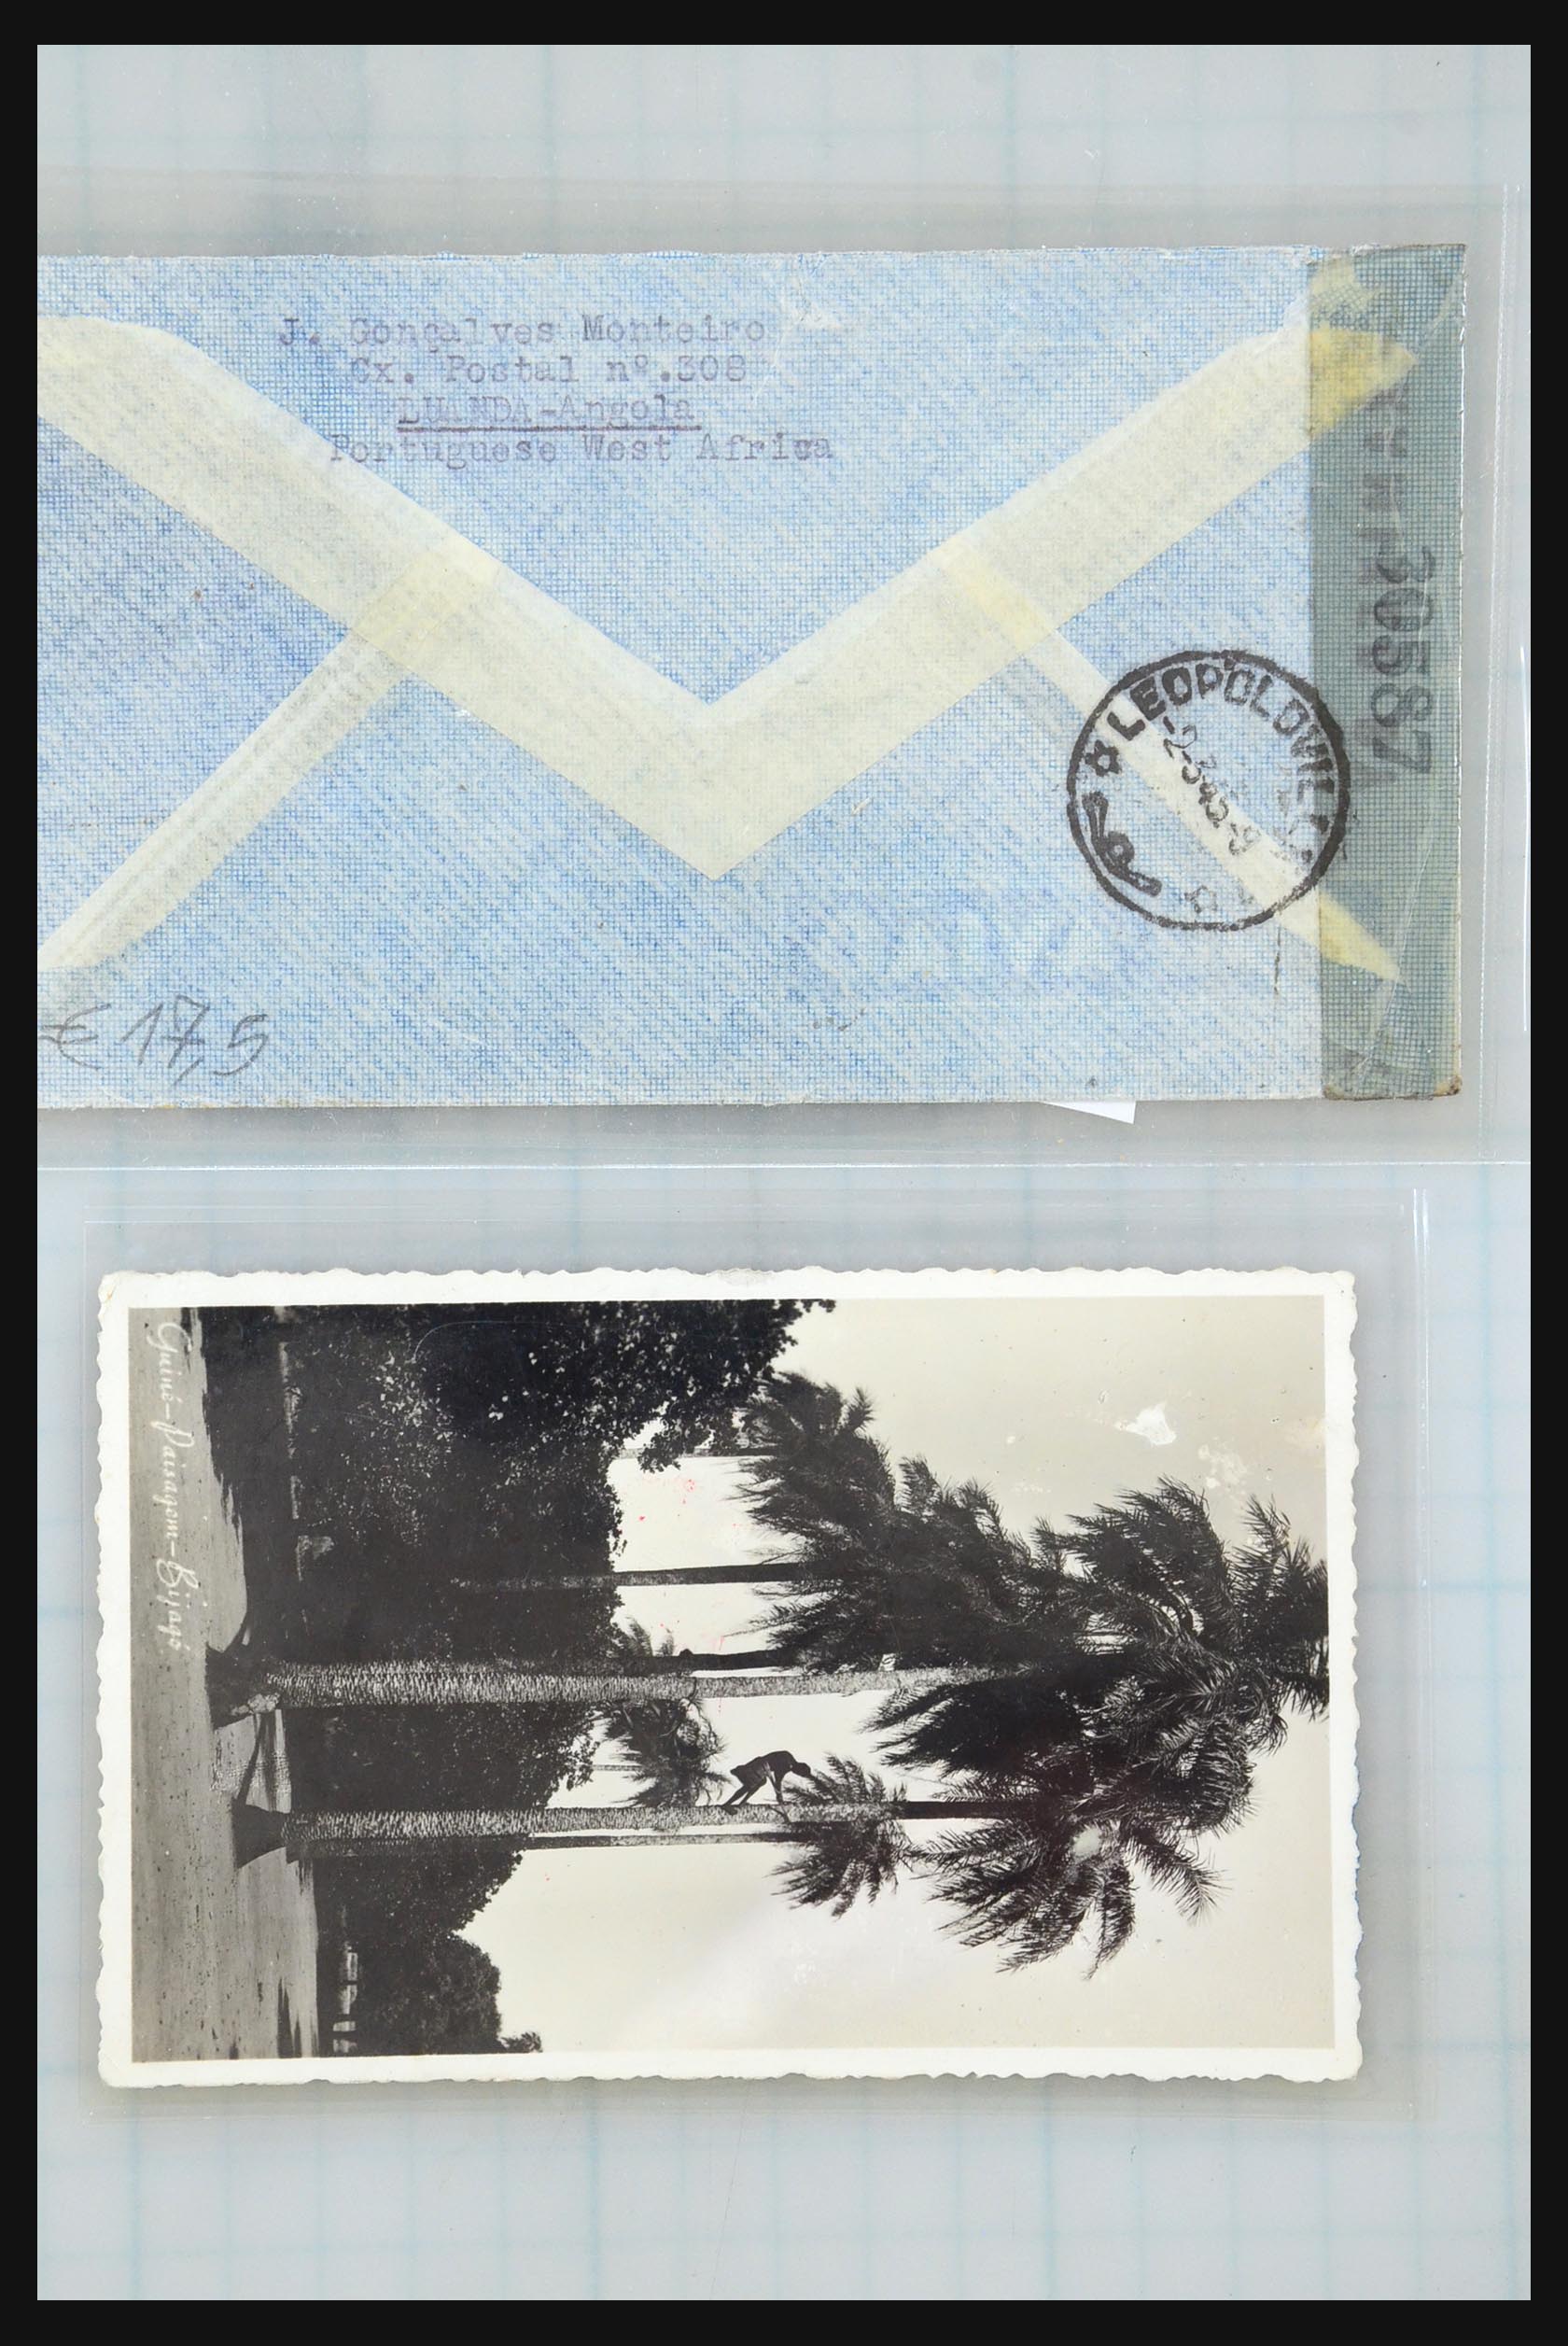 31358 257 - 31358 Portugal/Luxemburg/Greece covers 1880-1960.